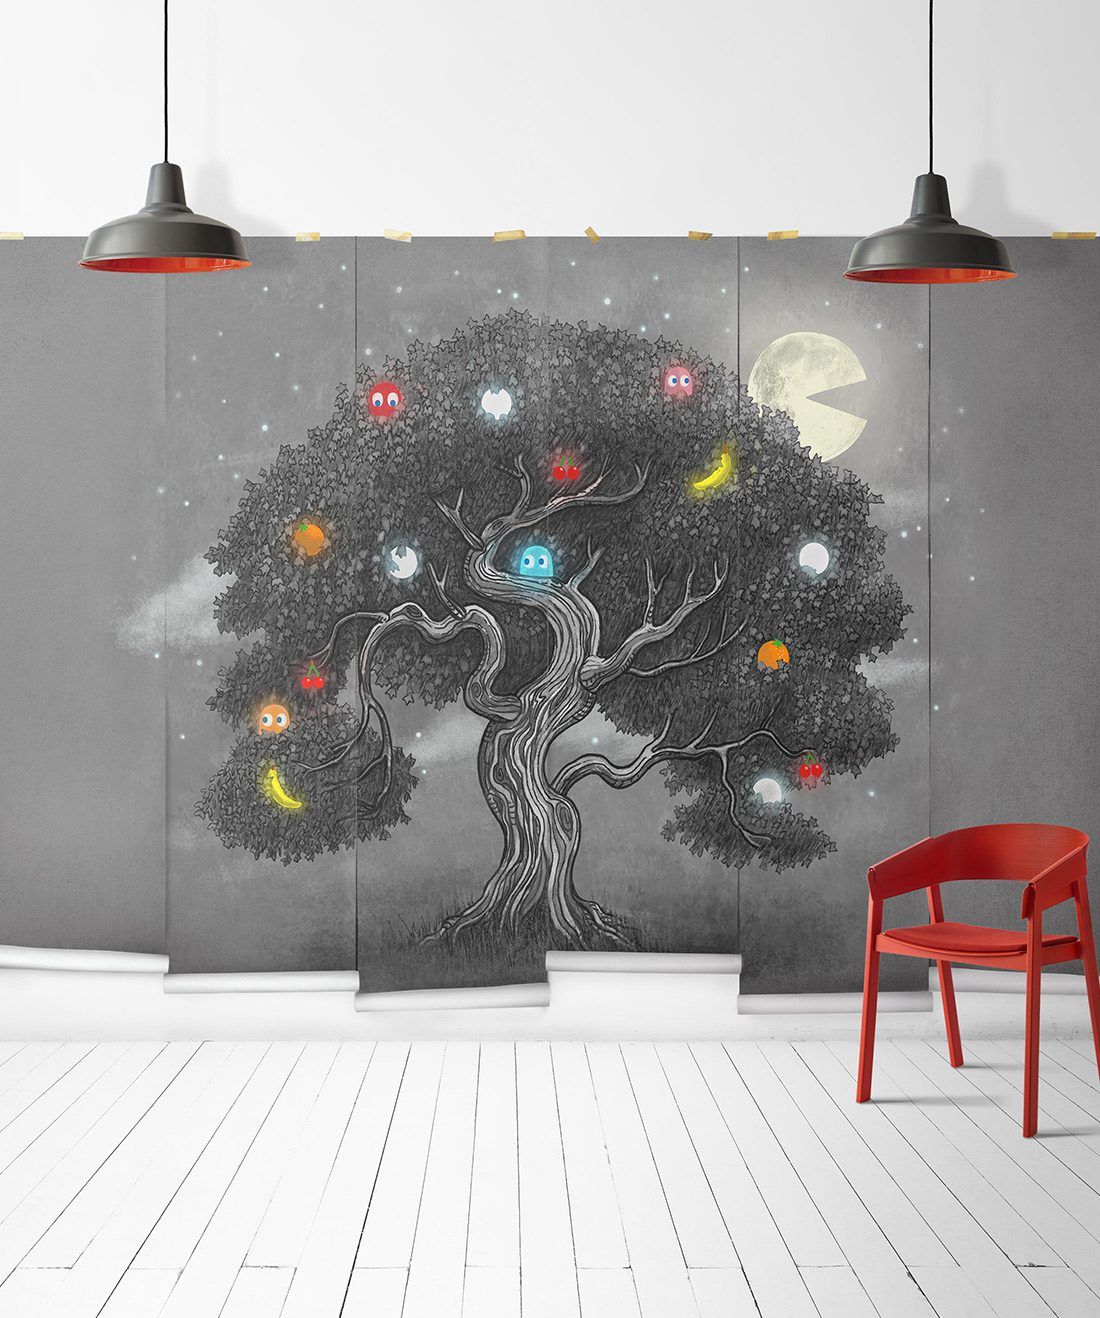 Midnight Snack is a Tree Wall Mural